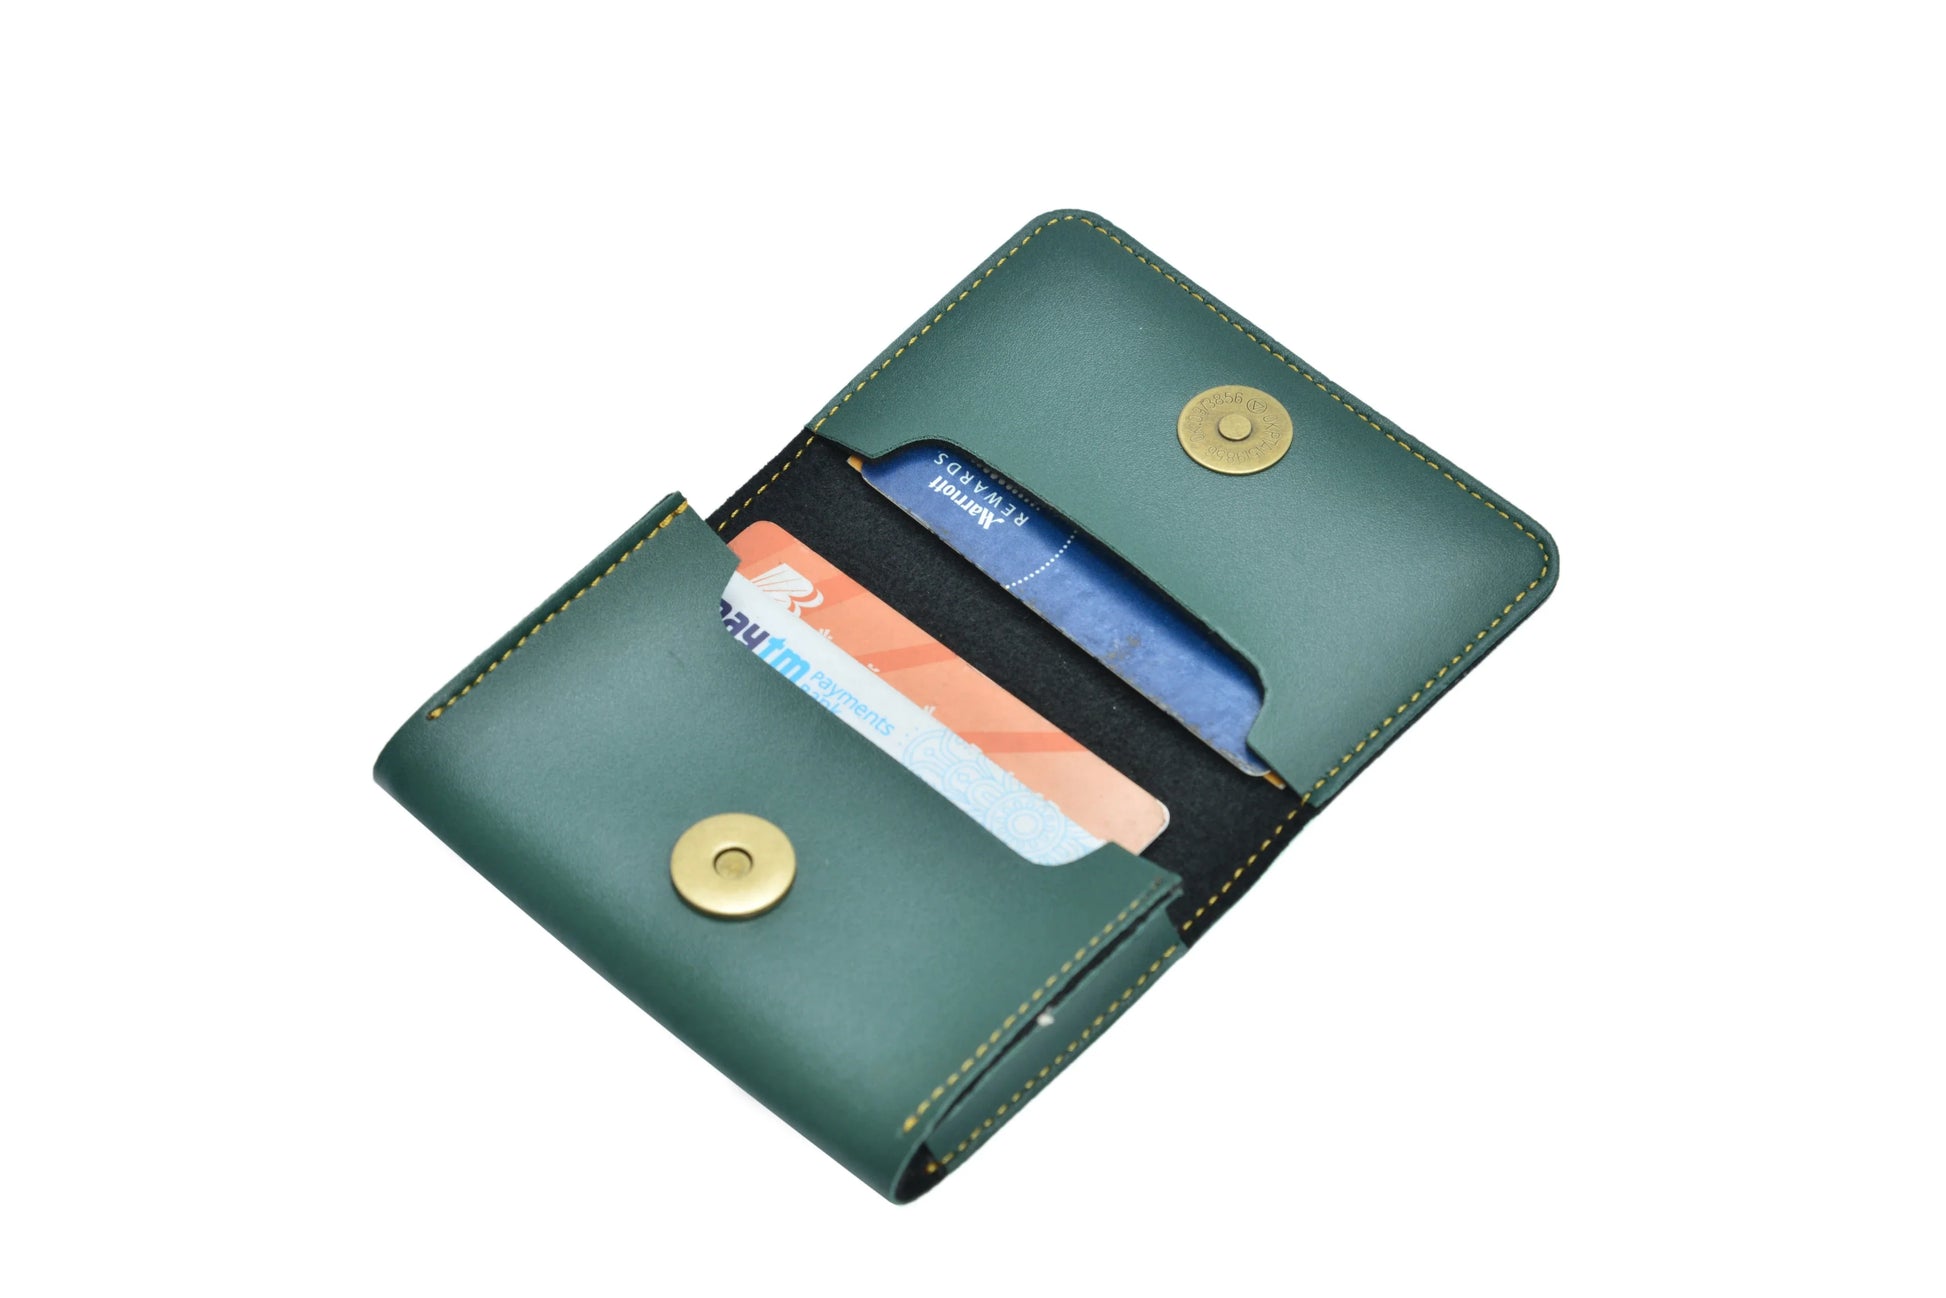 personalized-visiting-card-holder-faux-leather-olive-green-customized-best-gift-for-boyfriend-girlfriend. inside or open view of Personalized Business / Visitng Card Holder Vegan Leather -olive green